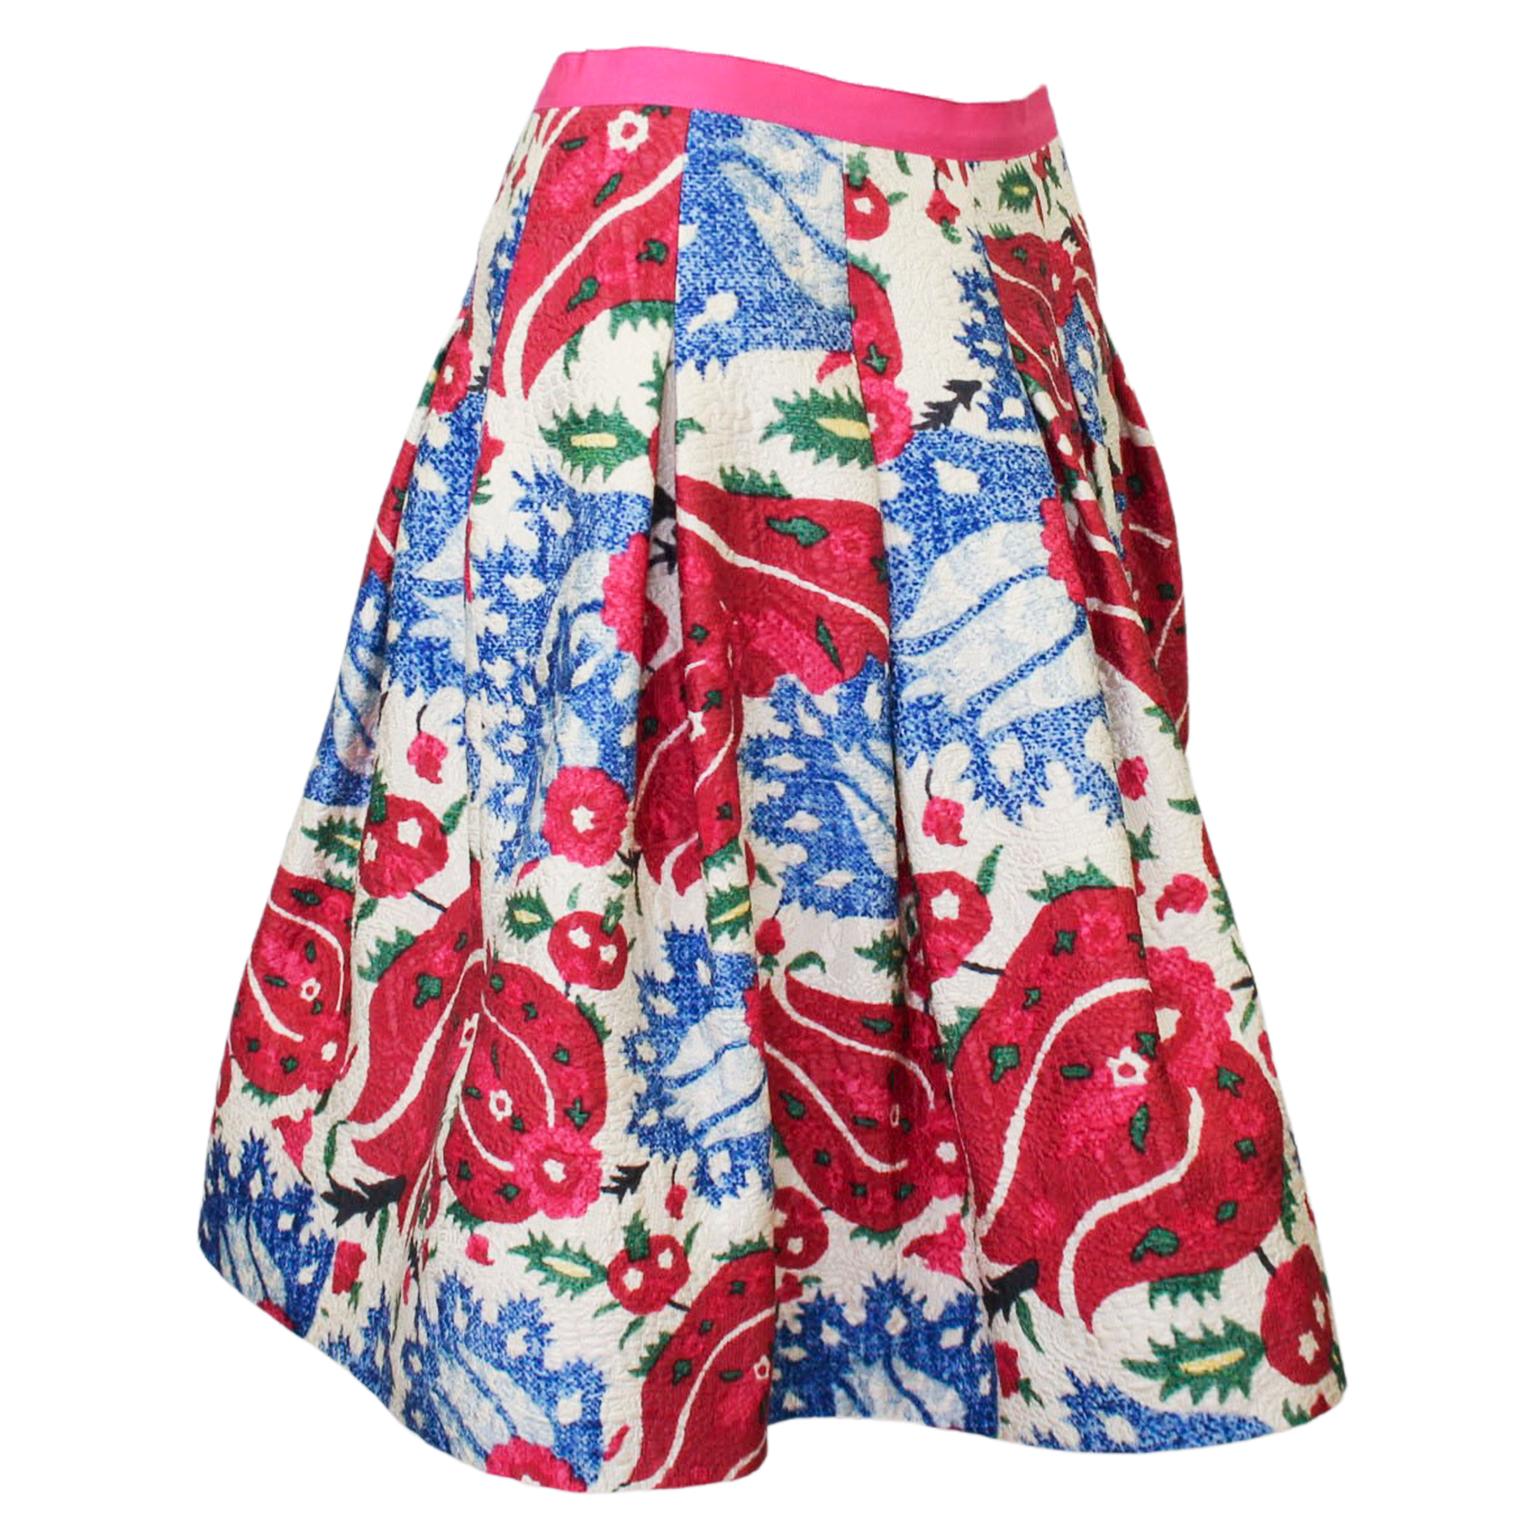 Early 2000s Oscar de la Renta flared skirt with a blue and red bold all over floral print. The skirt has a hot pink grosgrain ribbon waistband and zips up the back. The textured cotton/viscose matelasse fabric has some weight to it but is also light